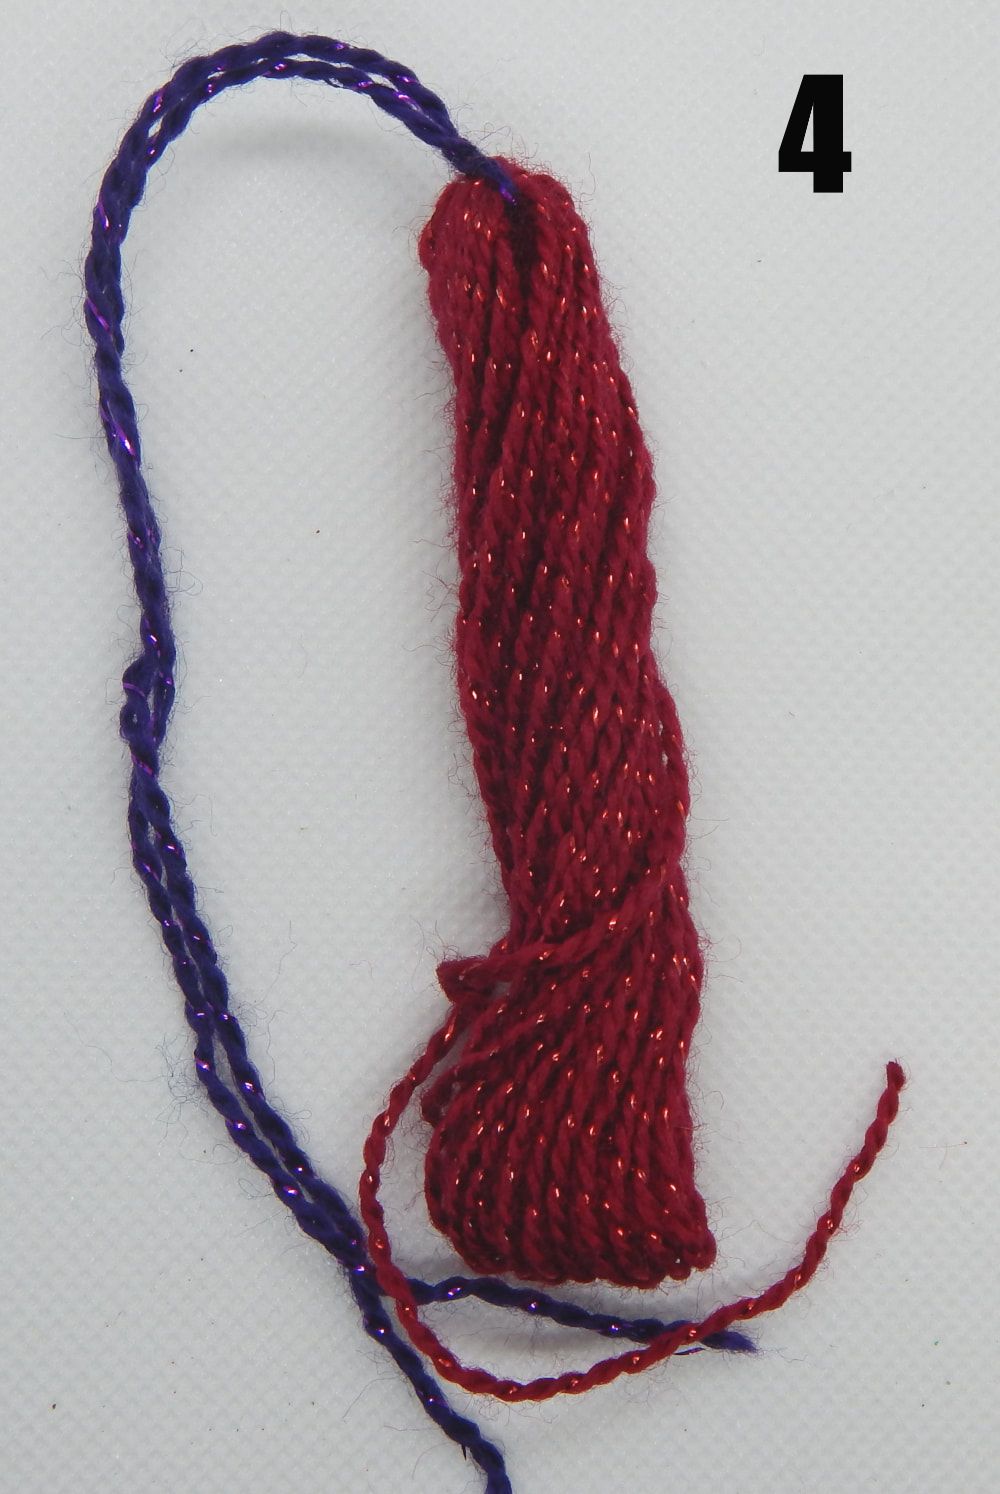 Multiple loops of red yarn are held together with a knotted piece of purple yarn. There is a 4 in the upper right hand corner of the picture.